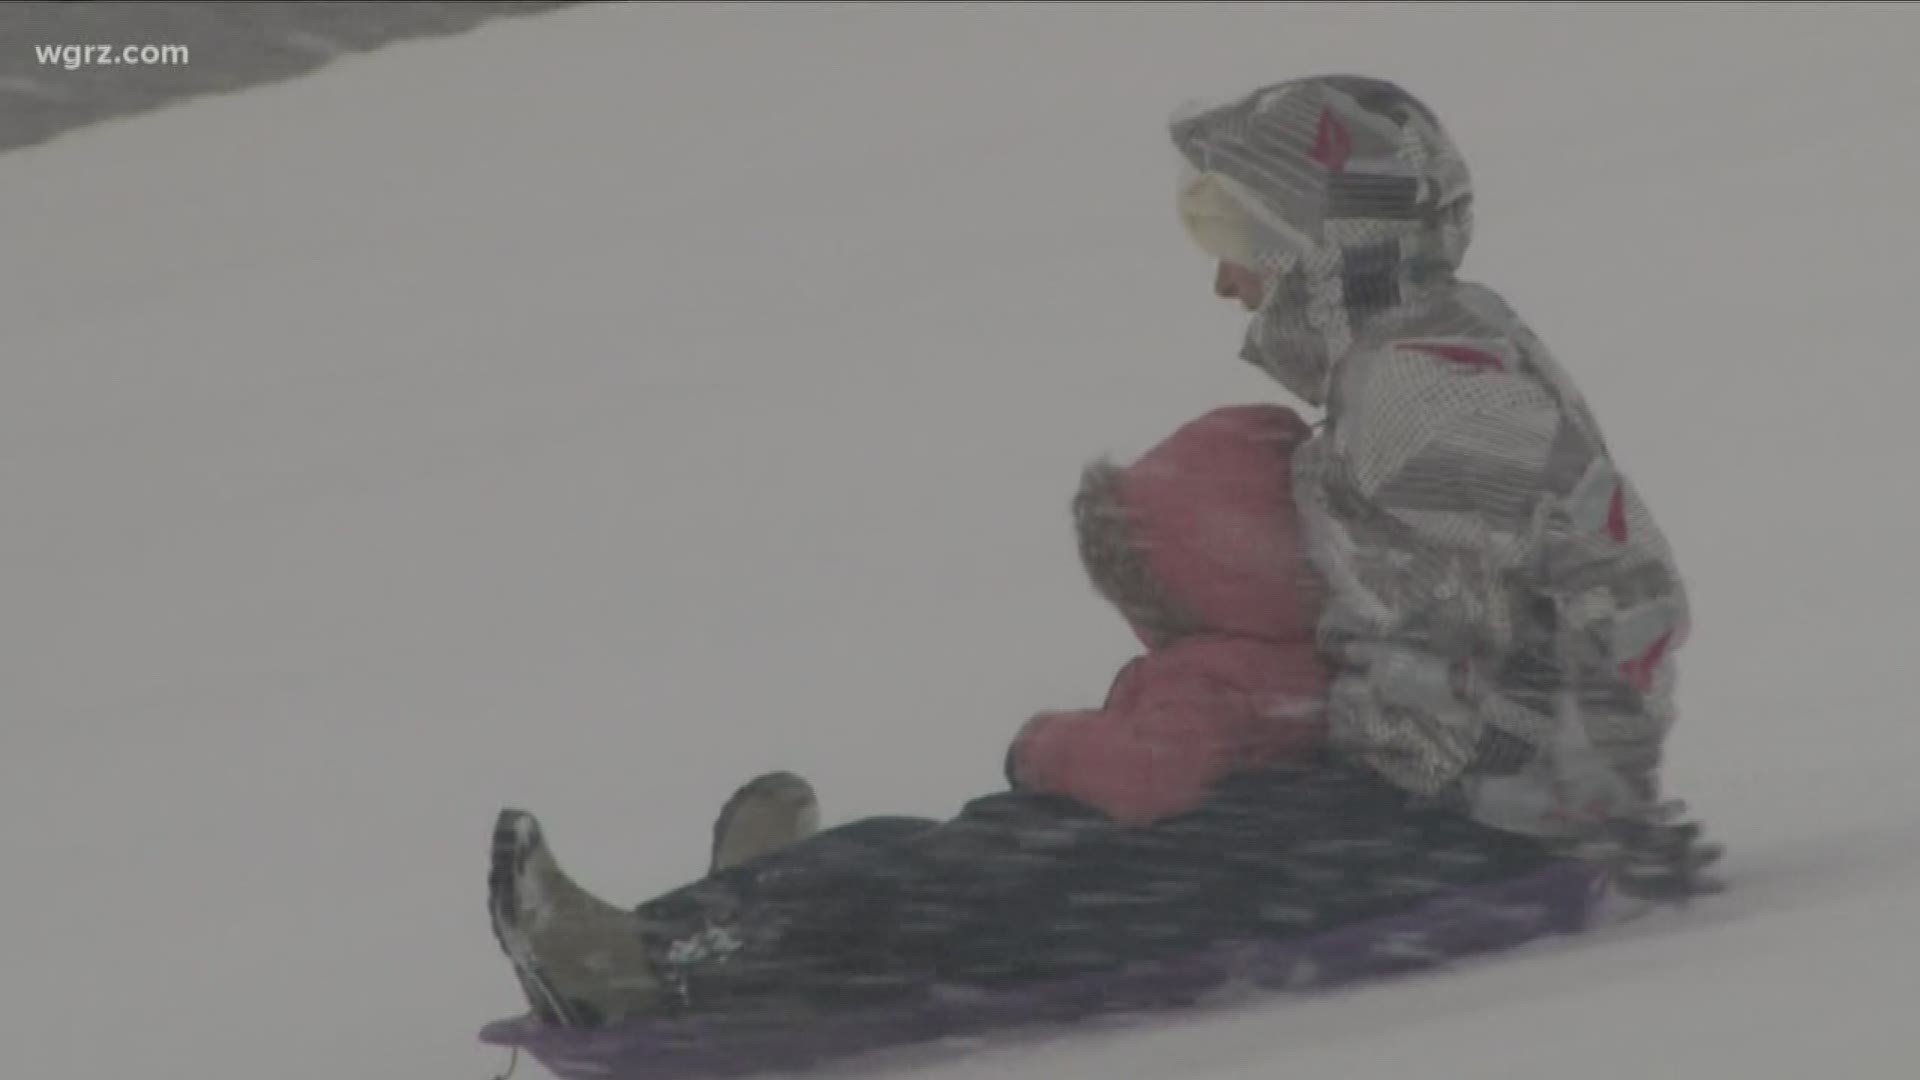 Mother nature came through for everyone headed to Winterfest at Chestnut Ridge Park today. Winterfest also featured downhill skiing and snowboarding.